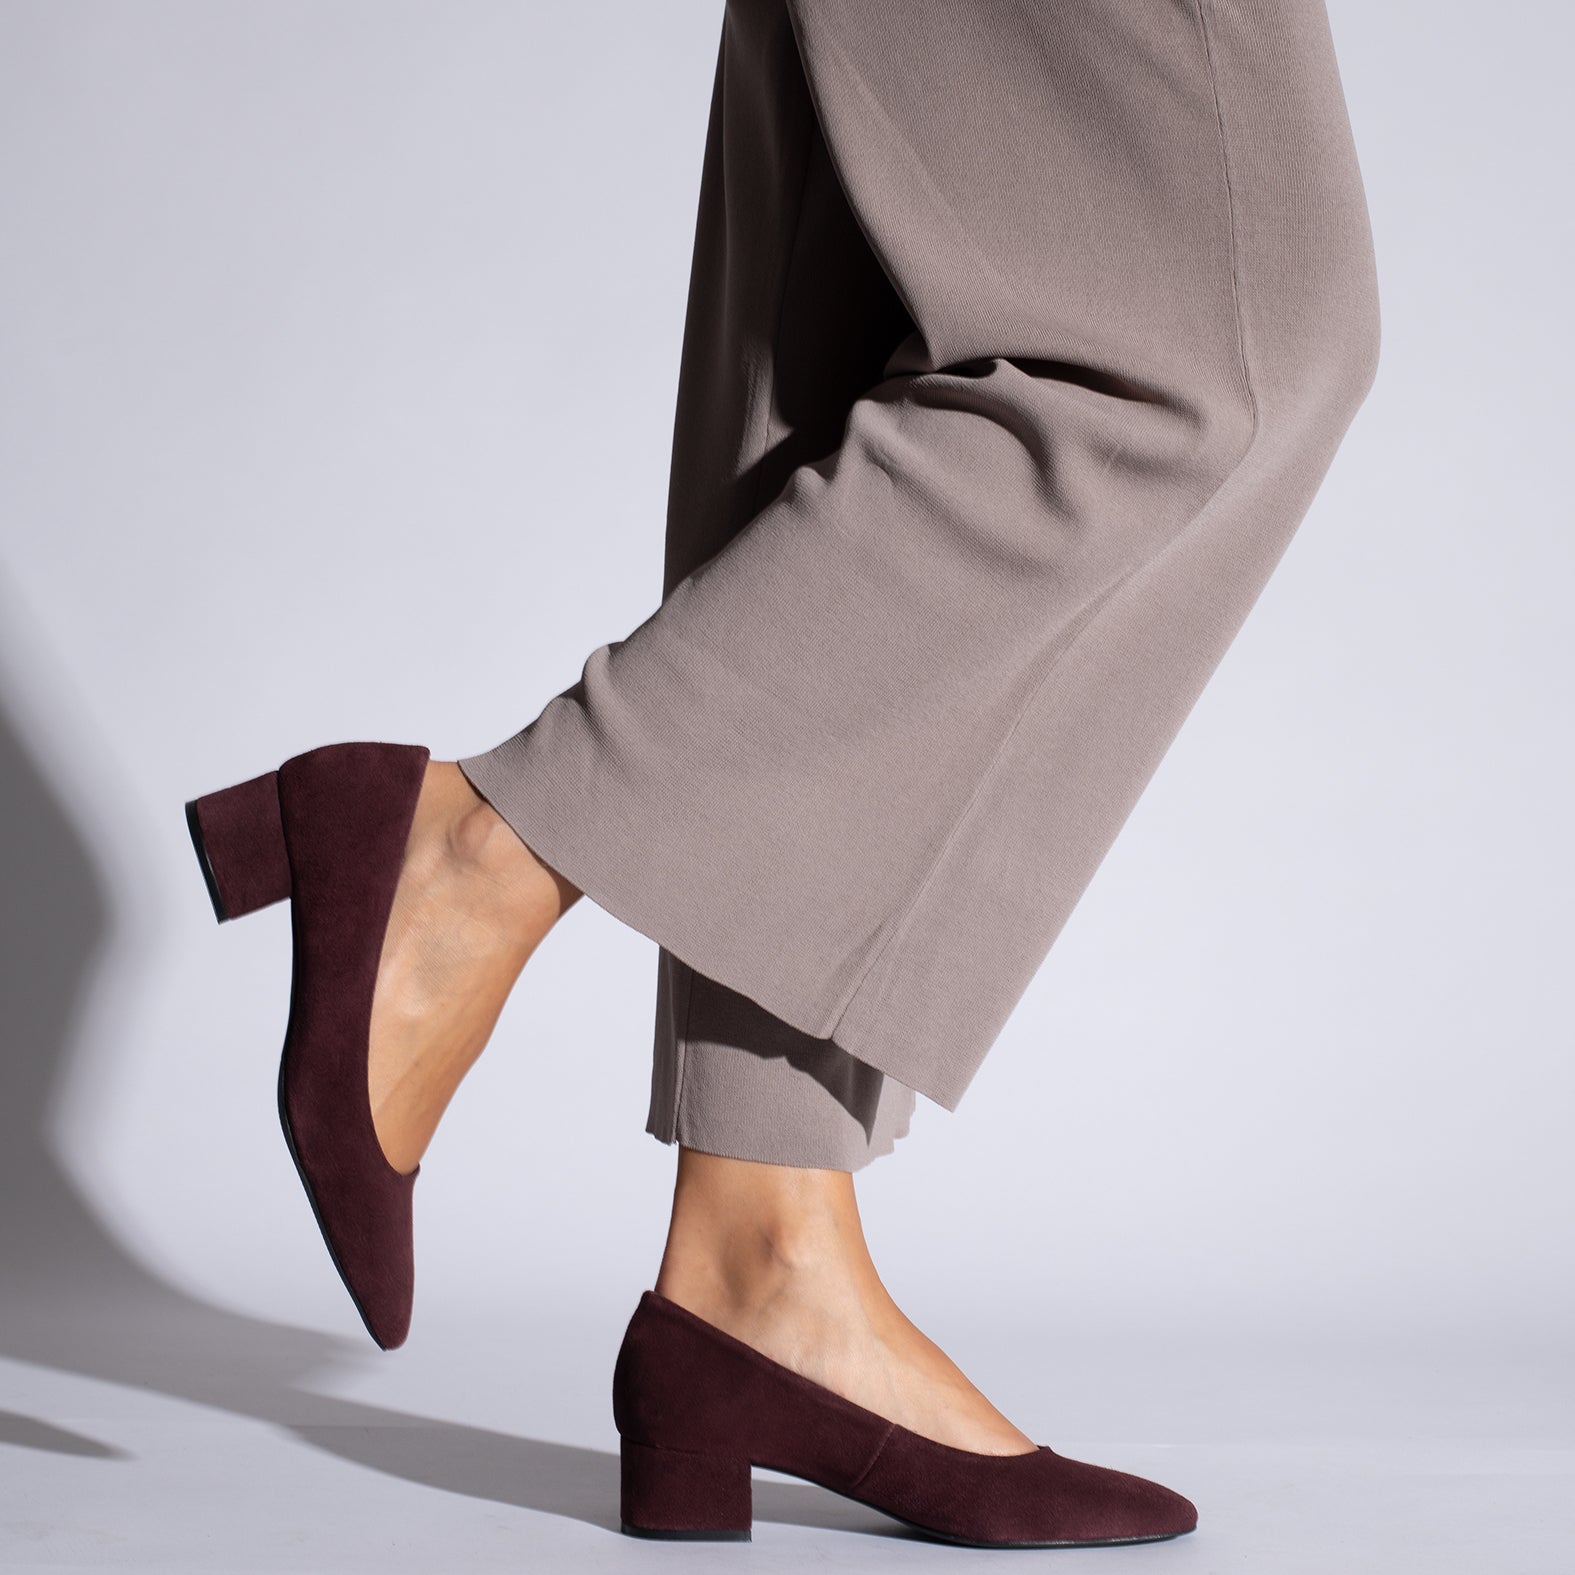 TREND – BURGUNDY square pointed mid heel